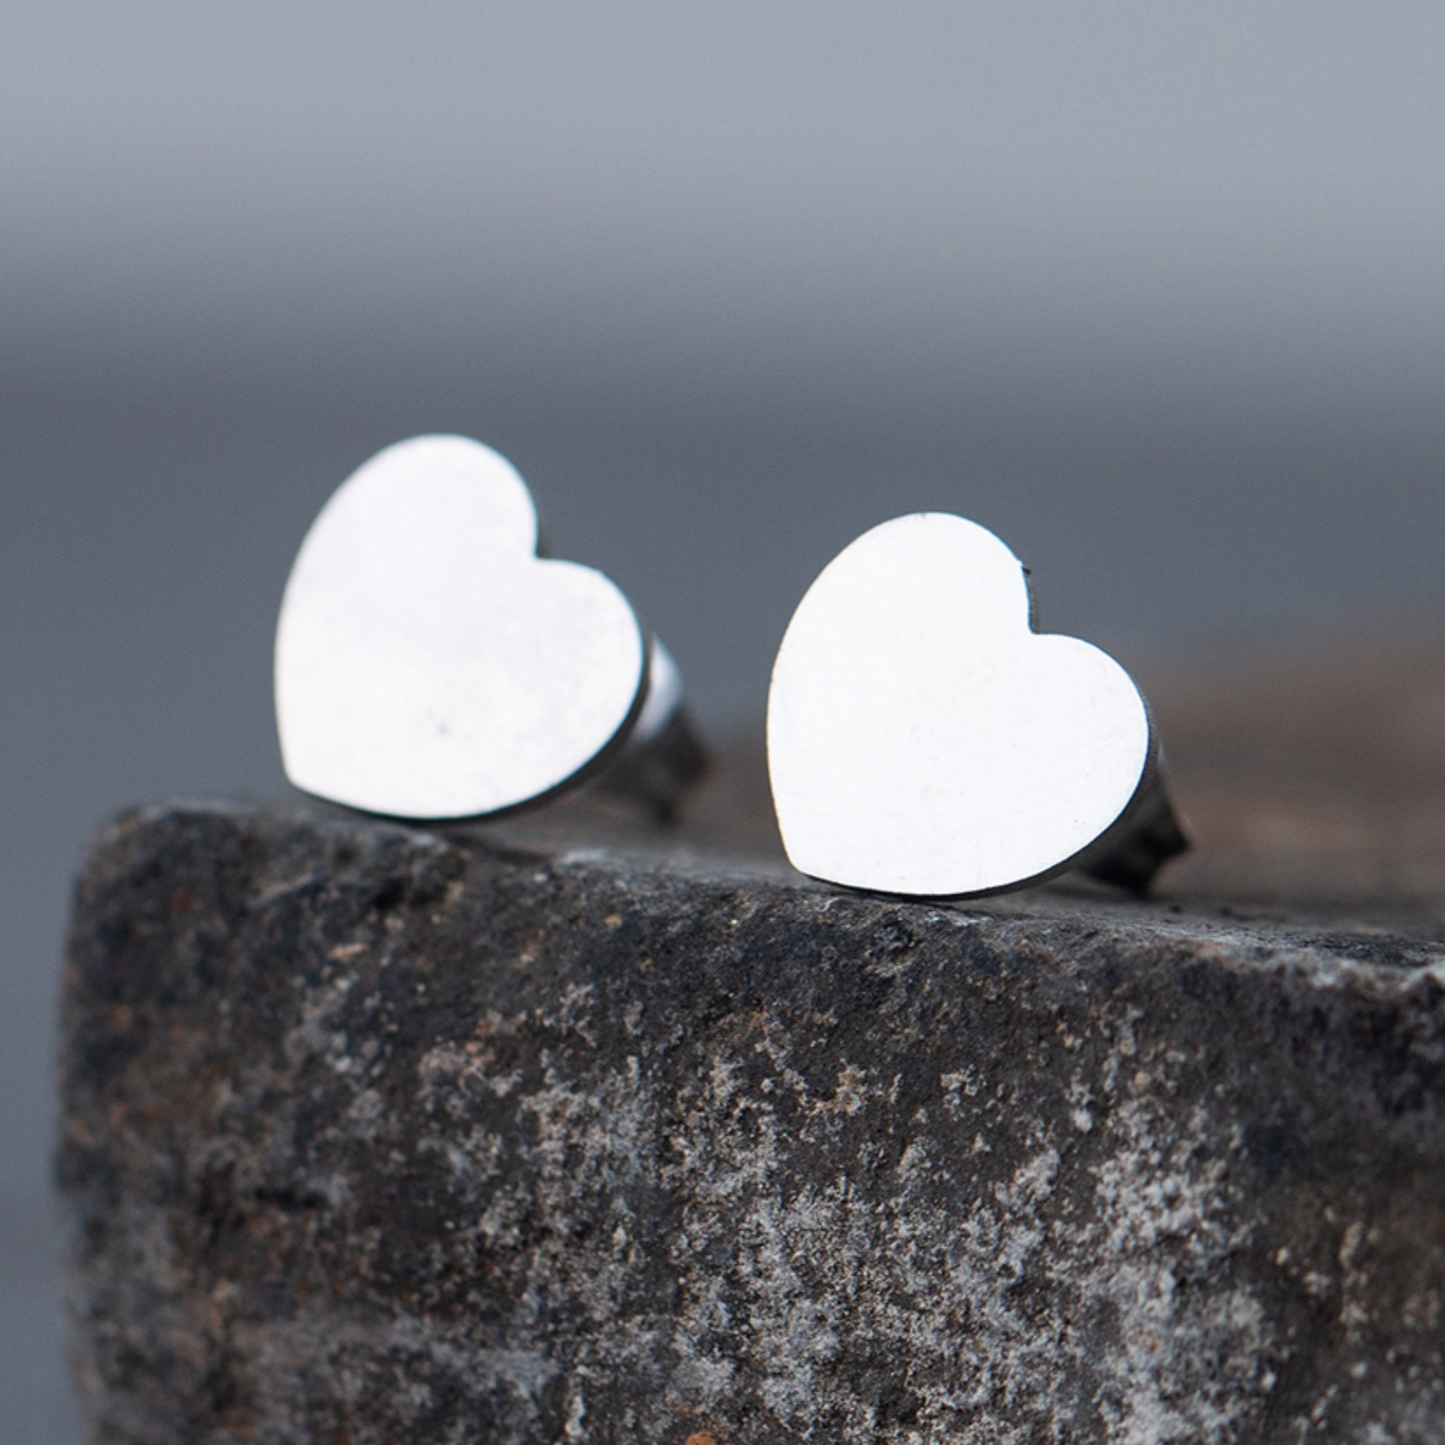 Solid Heart Studs